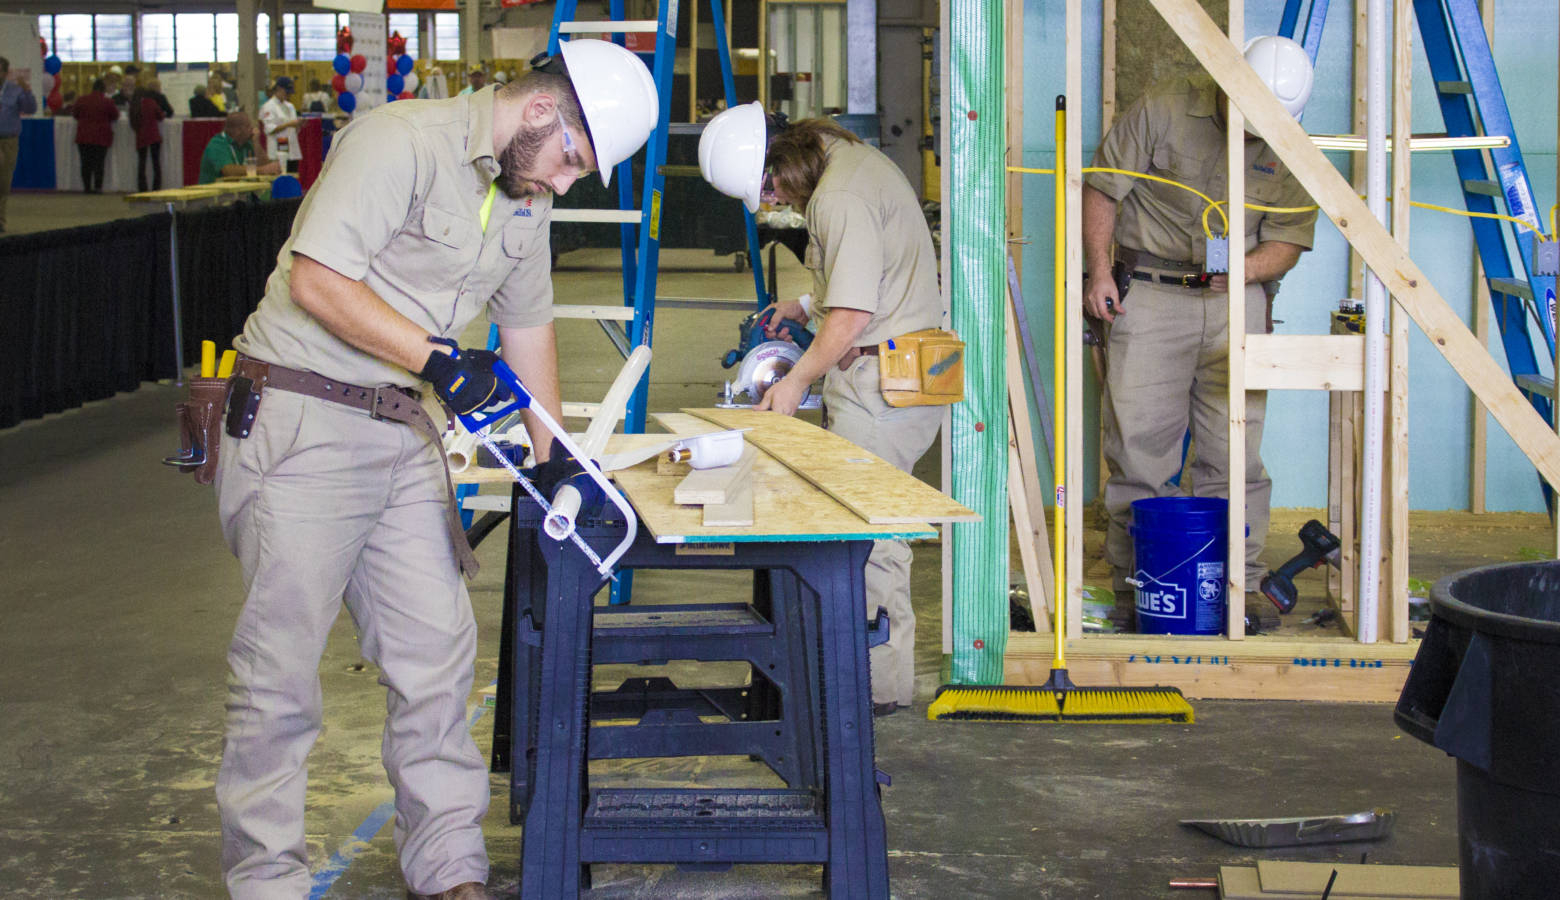 Students from around the nation compete each year in job skills contests at the SkillsUSA national competition, pictured here. (Peter Balonon-Rosen/IPB News)